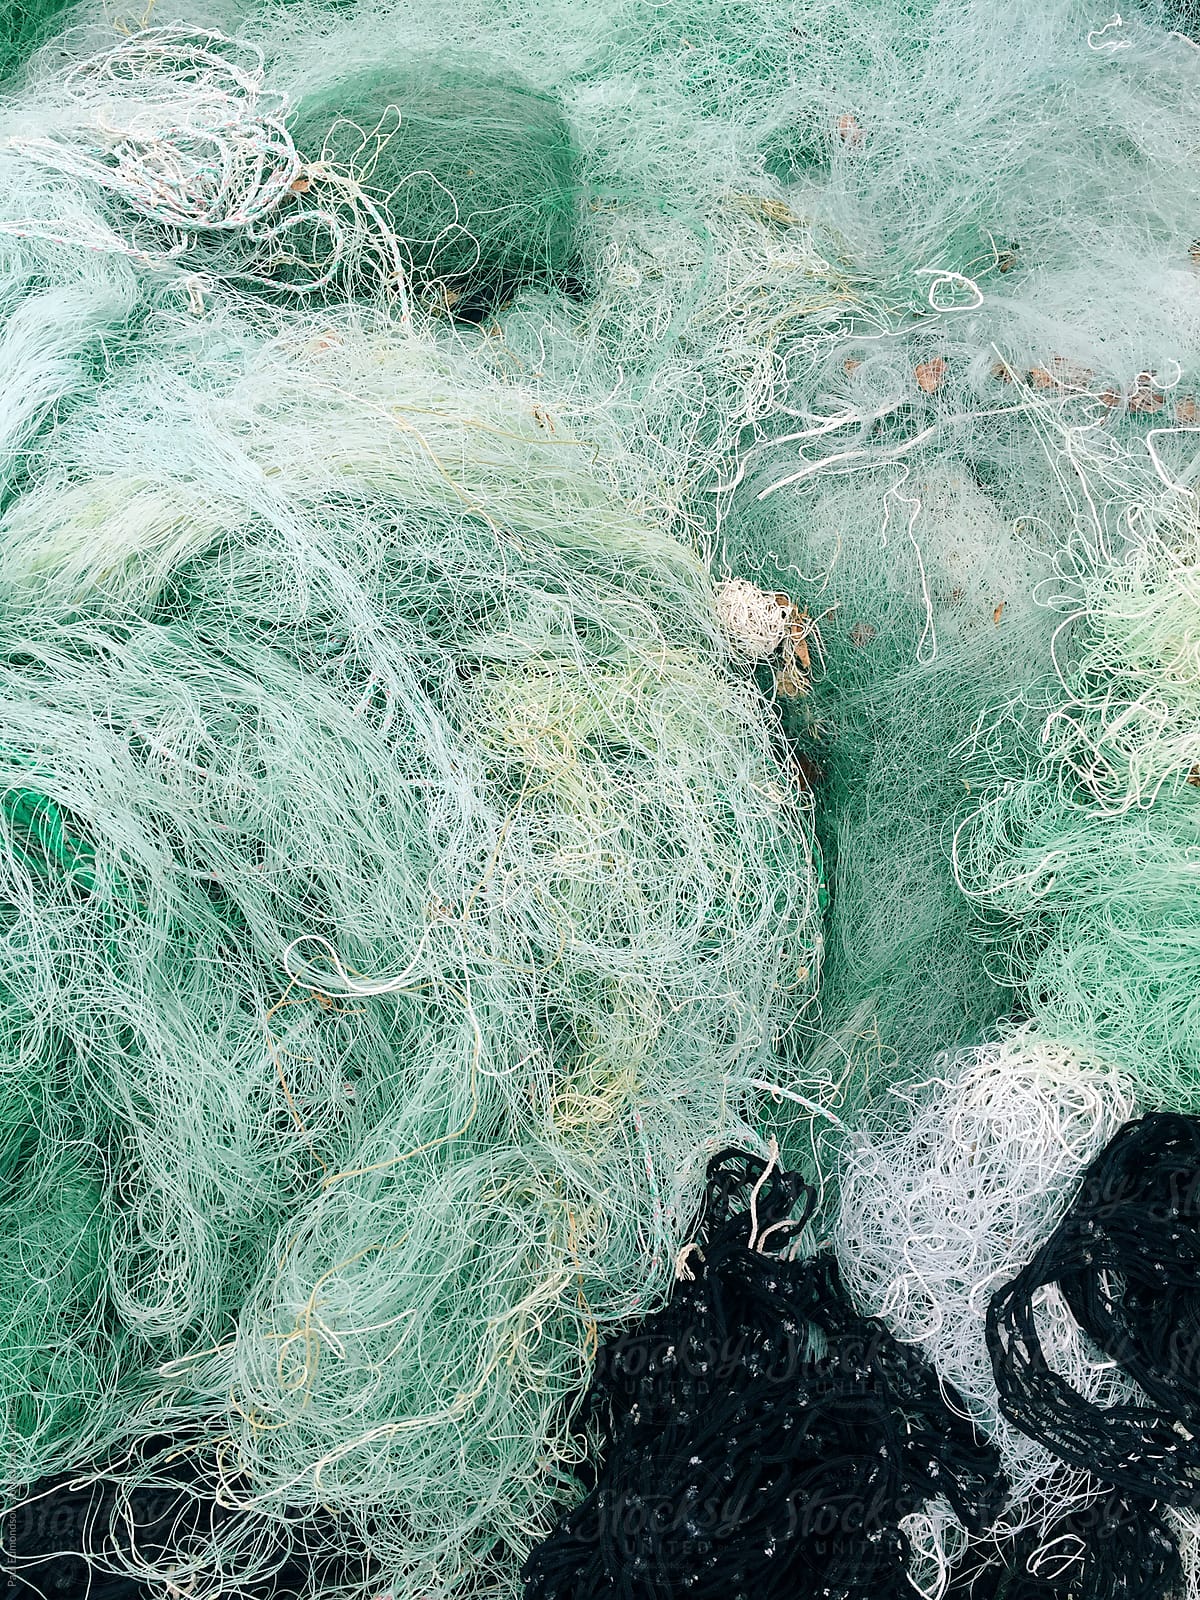 Commercial Fishing Nets